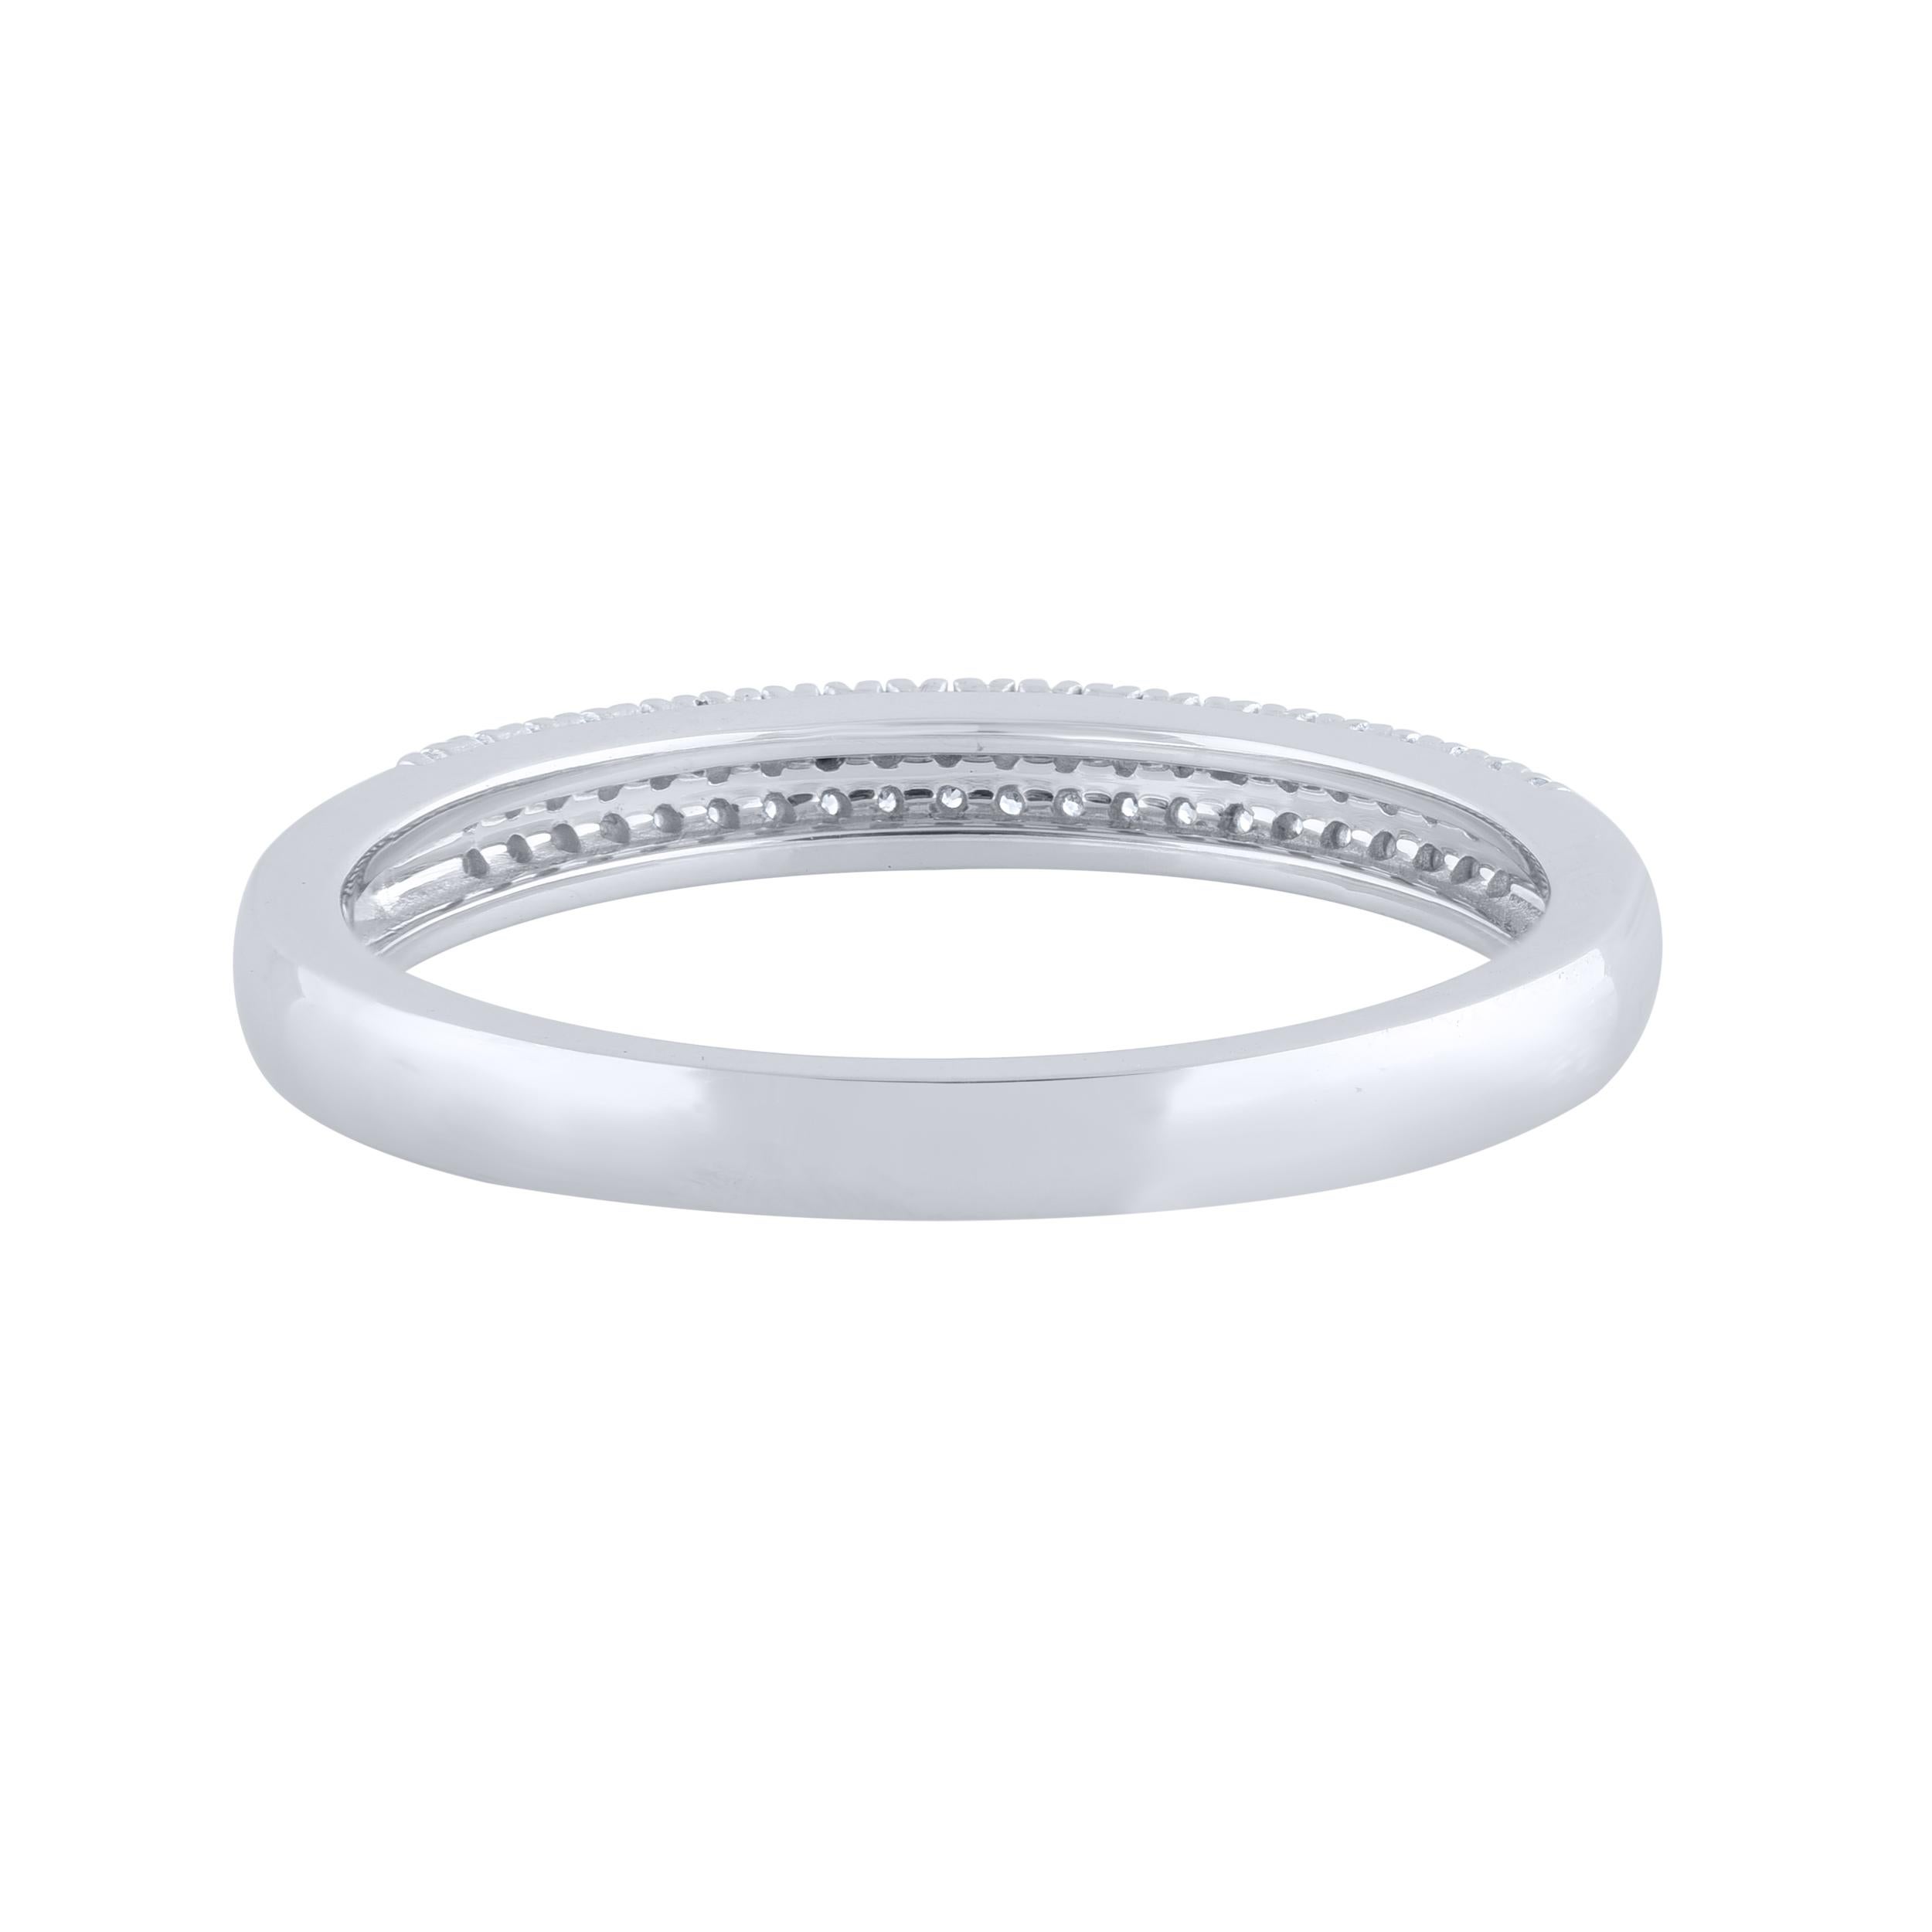 A bright and beautiful choice for any occasion, this sparkling diamond wedding band gives her a moment to remember. The ring is crafted from 14-karat white gold and features round single cut 42 diamonds prong set, H-I color I-2 clarity and a high